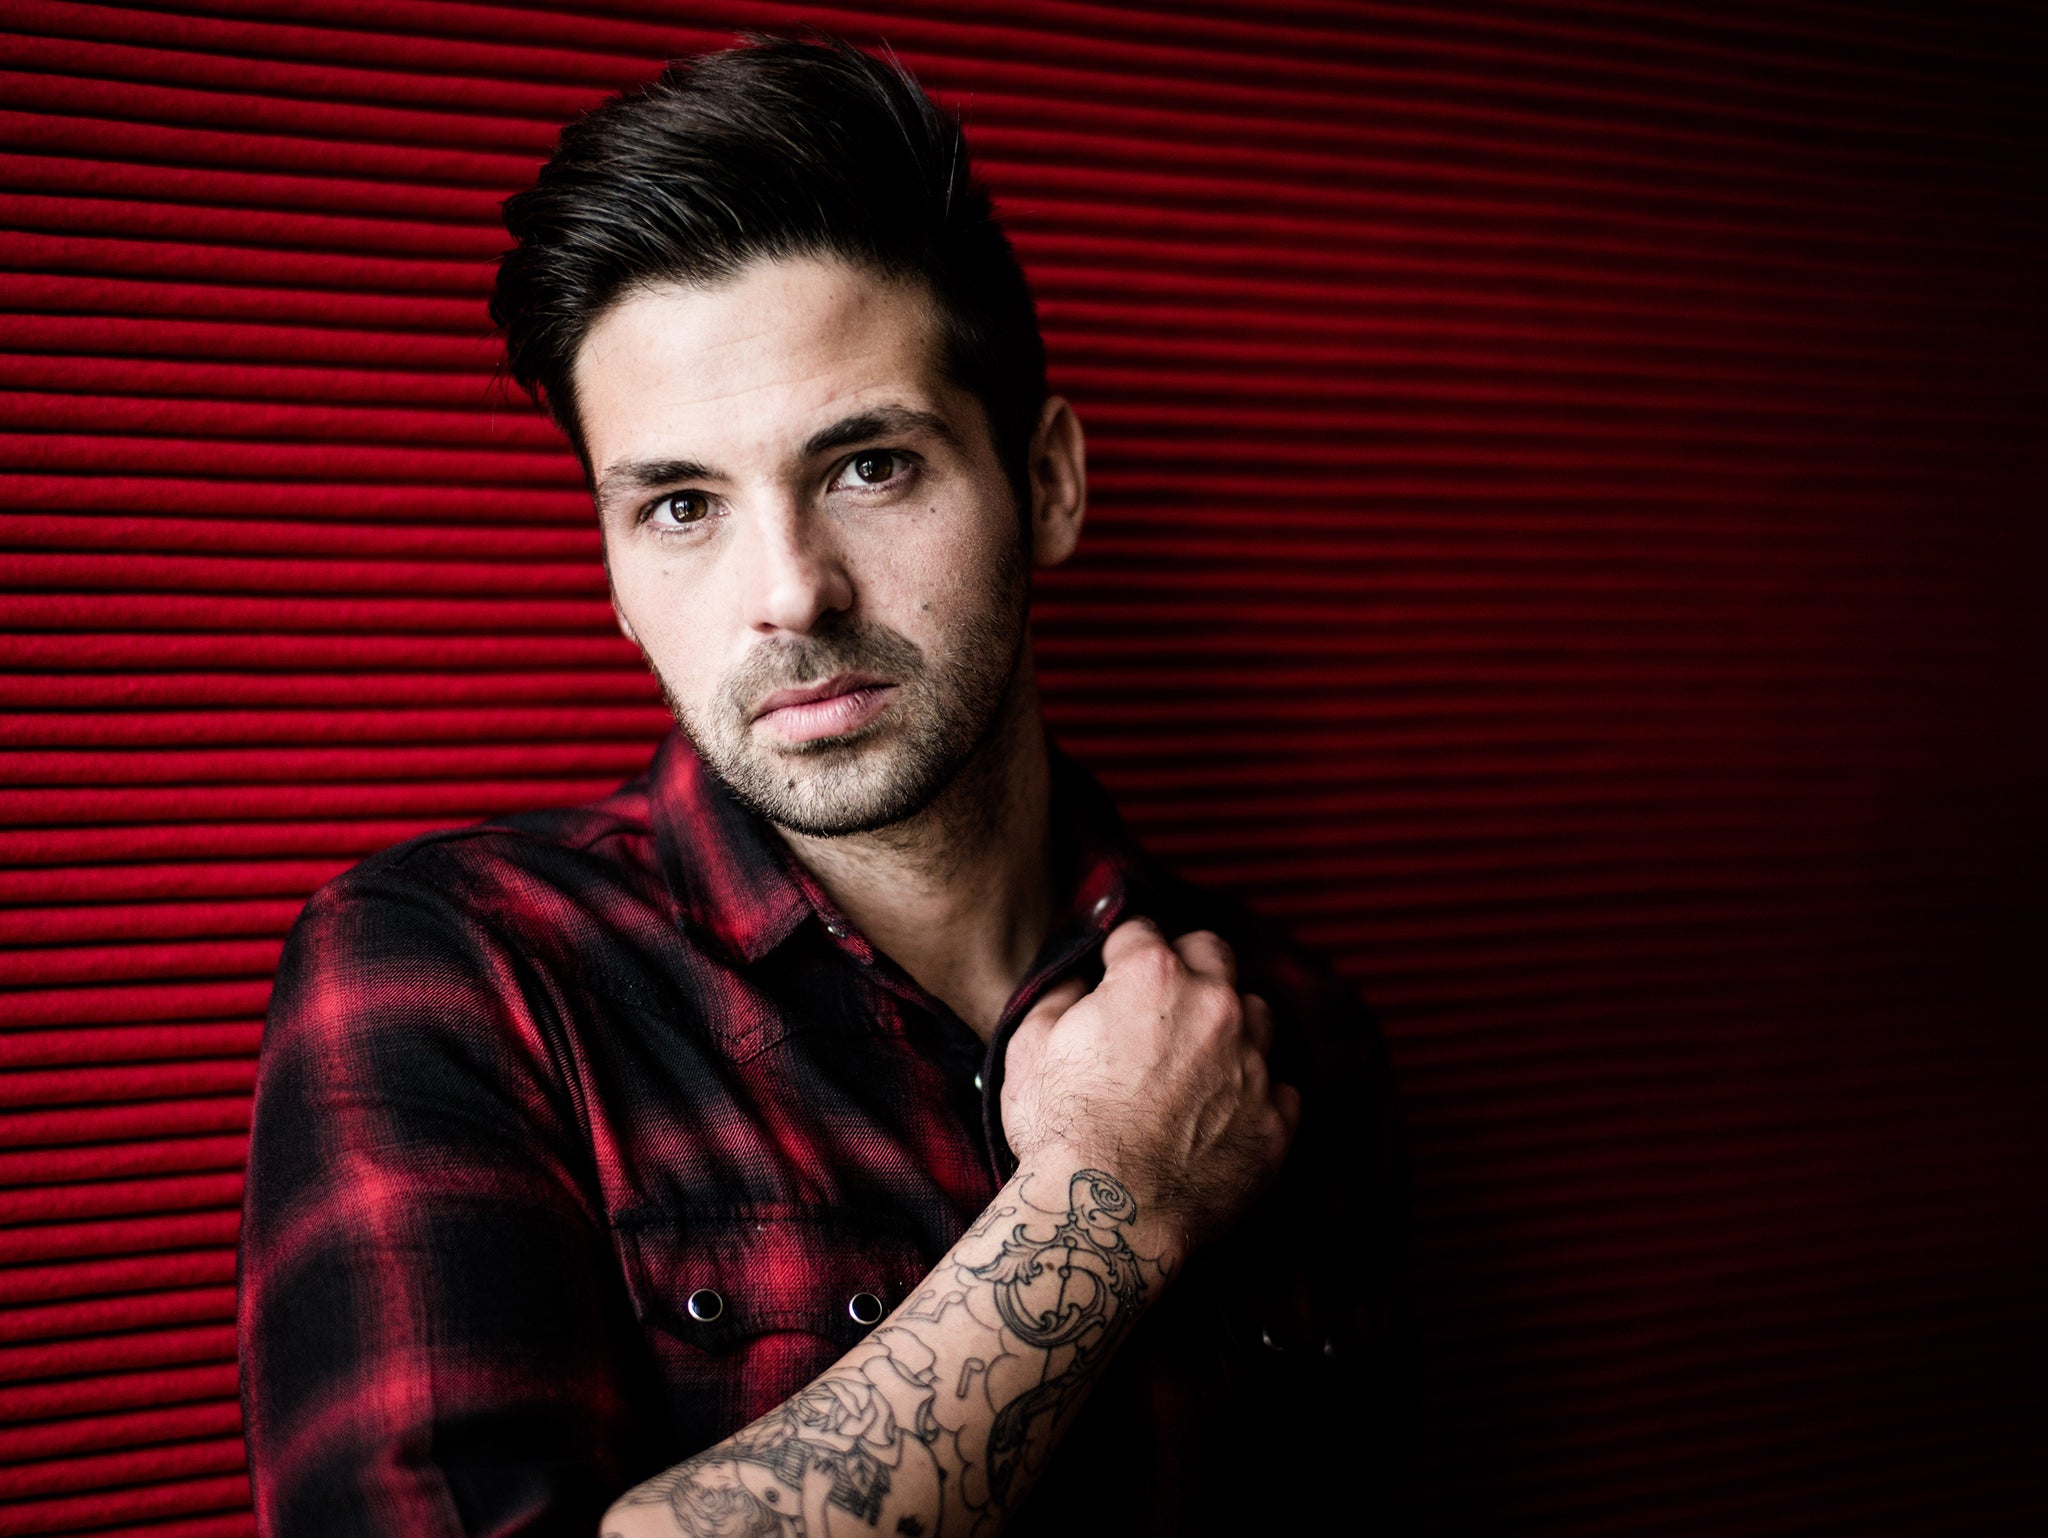 Ben Haenow, who won the eleventh series of The X Factor in 2014.